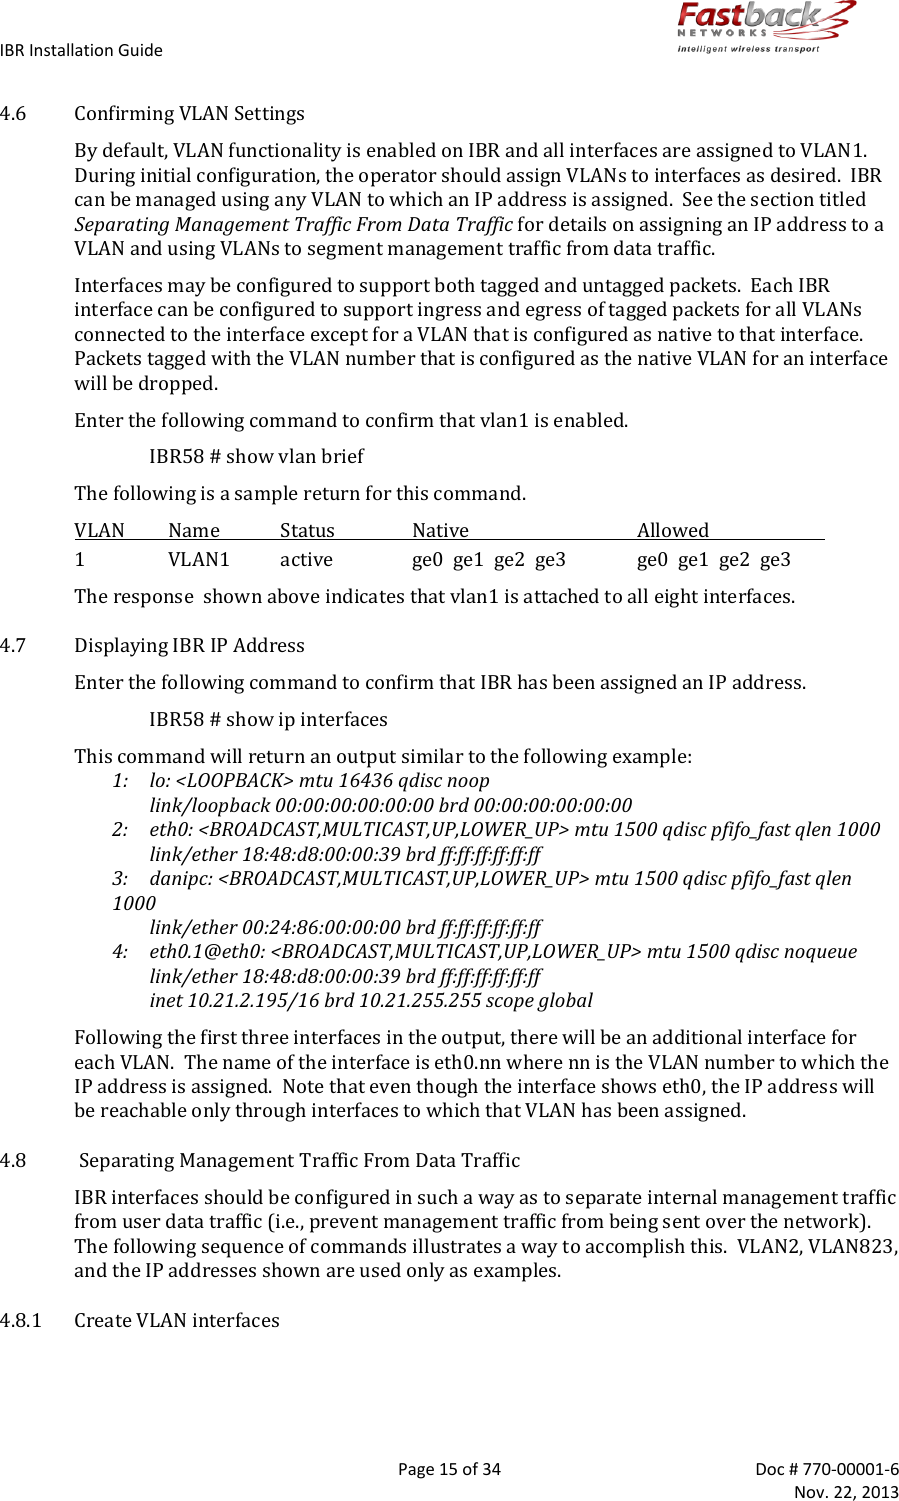 IBR Installation Guide        Page 15 of 34  Doc # 770-00001-6     Nov. 22, 2013   4.6 Confirming VLAN Settings By default, VLAN functionality is enabled on IBR and all interfaces are assigned to VLAN1.   During initial configuration, the operator should assign VLANs to interfaces as desired.  IBR can be managed using any VLAN to which an IP address is assigned.  See the section titled Separating Management Traffic From Data Traffic for details on assigning an IP address to a VLAN and using VLANs to segment management traffic from data traffic.   Interfaces may be configured to support both tagged and untagged packets.  Each IBR interface can be configured to support ingress and egress of tagged packets for all VLANs connected to the interface except for a VLAN that is configured as native to that interface.   Packets tagged with the VLAN number that is configured as the native VLAN for an interface will be dropped. Enter the following command to confirm that vlan1 is enabled. IBR58 # show vlan brief The following is a sample return for this command. VLAN  Name  Status  Native  Allowed     1  VLAN1  active  ge0  ge1  ge2  ge3  ge0  ge1  ge2  ge3 The response  shown above indicates that vlan1 is attached to all eight interfaces. 4.7 Displaying IBR IP Address Enter the following command to confirm that IBR has been assigned an IP address. IBR58 # show ip interfaces This command will return an output similar to the following example:   1:  lo: &lt;LOOPBACK&gt; mtu 16436 qdisc noop        link/loopback 00:00:00:00:00:00 brd 00:00:00:00:00:00 2:   eth0: &lt;BROADCAST,MULTICAST,UP,LOWER_UP&gt; mtu 1500 qdisc pfifo_fast qlen 1000       link/ether 18:48:d8:00:00:39 brd ff:ff:ff:ff:ff:ff 3:   danipc: &lt;BROADCAST,MULTICAST,UP,LOWER_UP&gt; mtu 1500 qdisc pfifo_fast qlen 1000       link/ether 00:24:86:00:00:00 brd ff:ff:ff:ff:ff:ff 4:   eth0.1@eth0: &lt;BROADCAST,MULTICAST,UP,LOWER_UP&gt; mtu 1500 qdisc noqueue        link/ether 18:48:d8:00:00:39 brd ff:ff:ff:ff:ff:ff      inet 10.21.2.195/16 brd 10.21.255.255 scope global Following the first three interfaces in the output, there will be an additional interface for each VLAN.  The name of the interface is eth0.nn where nn is the VLAN number to which the IP address is assigned.  Note that even though the interface shows eth0, the IP address will be reachable only through interfaces to which that VLAN has been assigned. 4.8  Separating Management Traffic From Data Traffic IBR interfaces should be configured in such a way as to separate internal management traffic from user data traffic (i.e., prevent management traffic from being sent over the network).  The following sequence of commands illustrates a way to accomplish this.  VLAN2, VLAN823, and the IP addresses shown are used only as examples. 4.8.1 Create VLAN interfaces  